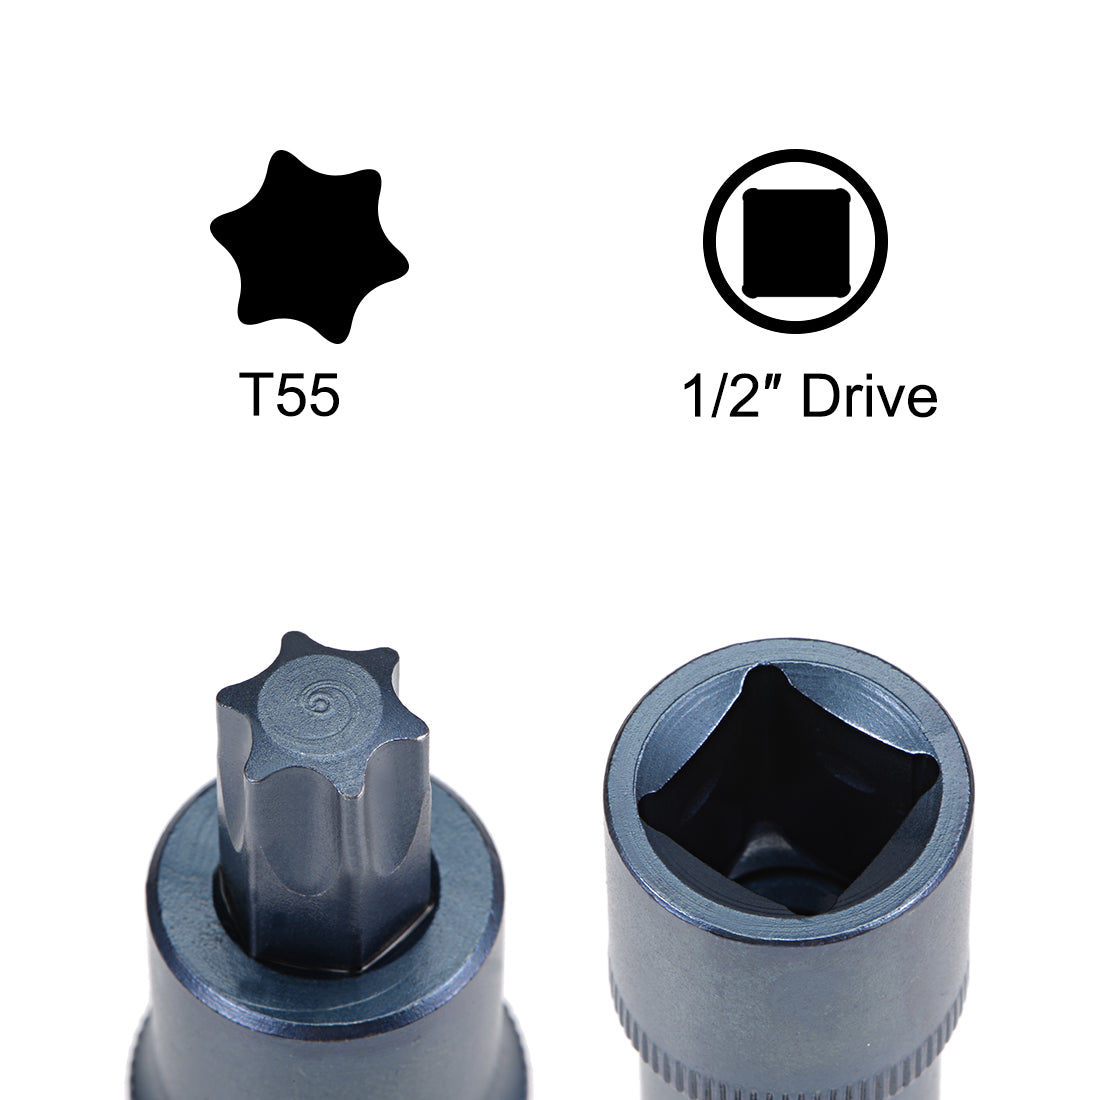 uxcell Uxcell 1/2" Drive x T55 Torx Bit Socket, S2 Steel Bits, CR-V Sockets Metric 2" Length Blue (For Hand Use Only)